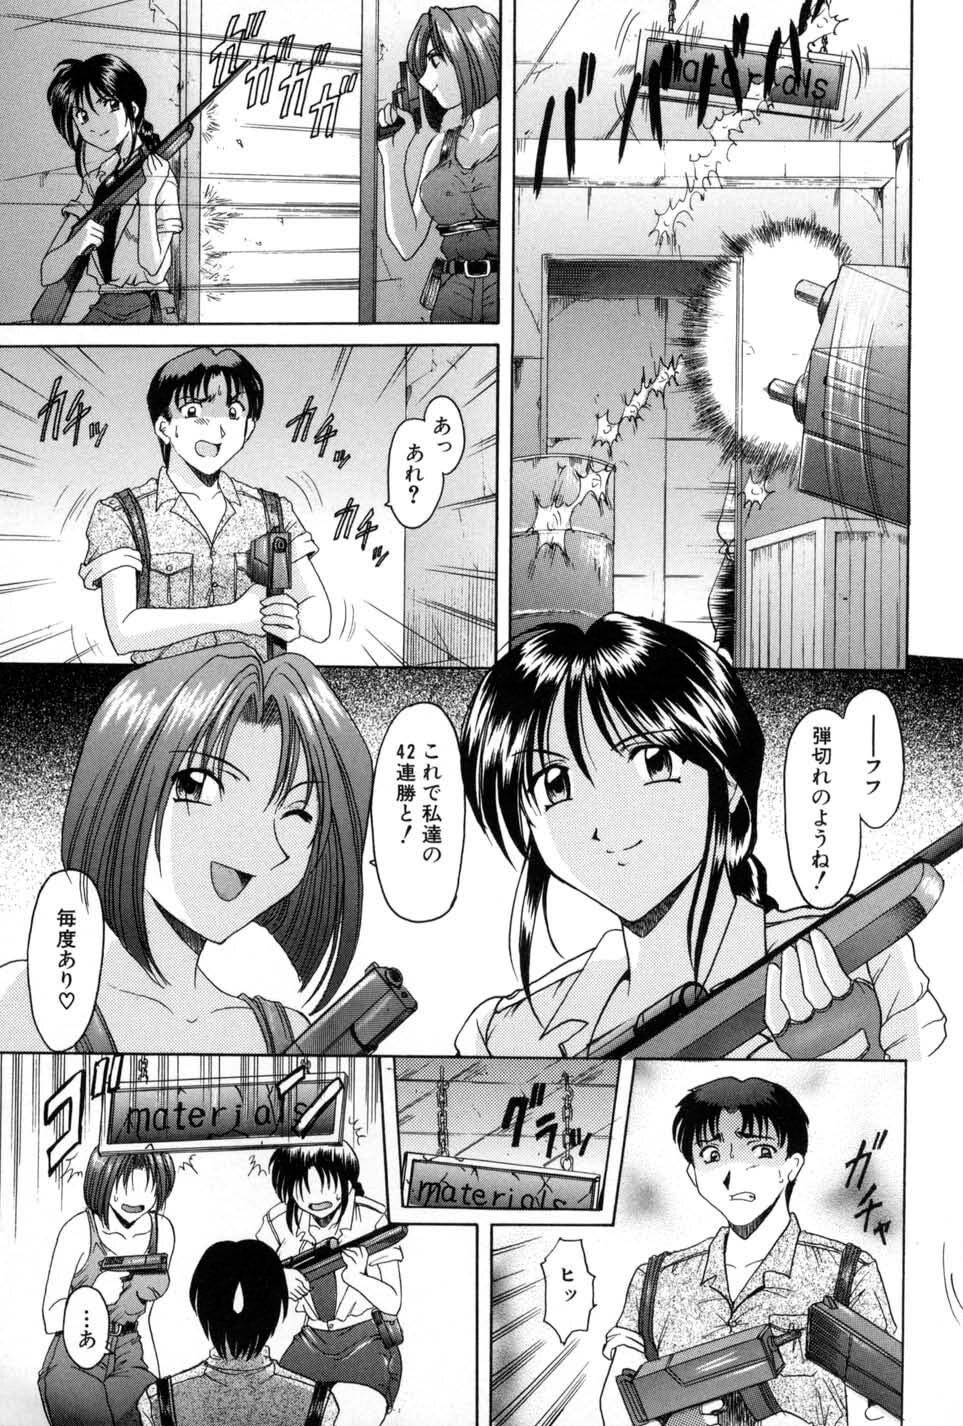 Stepsiblings Injyoku no Utage - Youre under arrest | taiho shichauzo Family Roleplay - Page 7